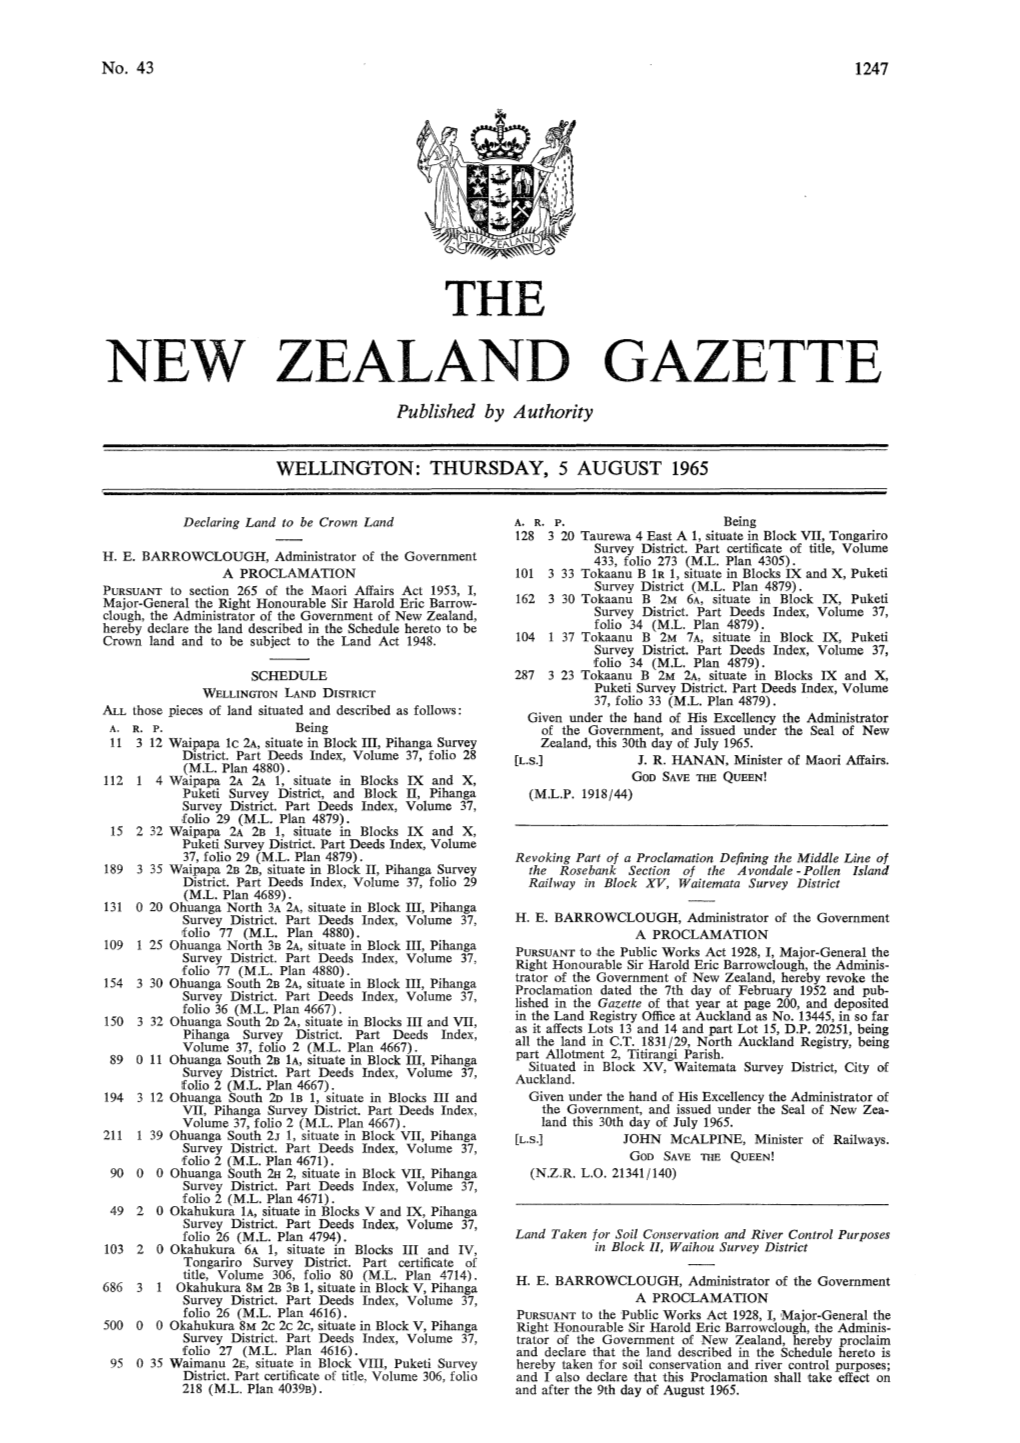 No 43, 5 August 1965, 1247